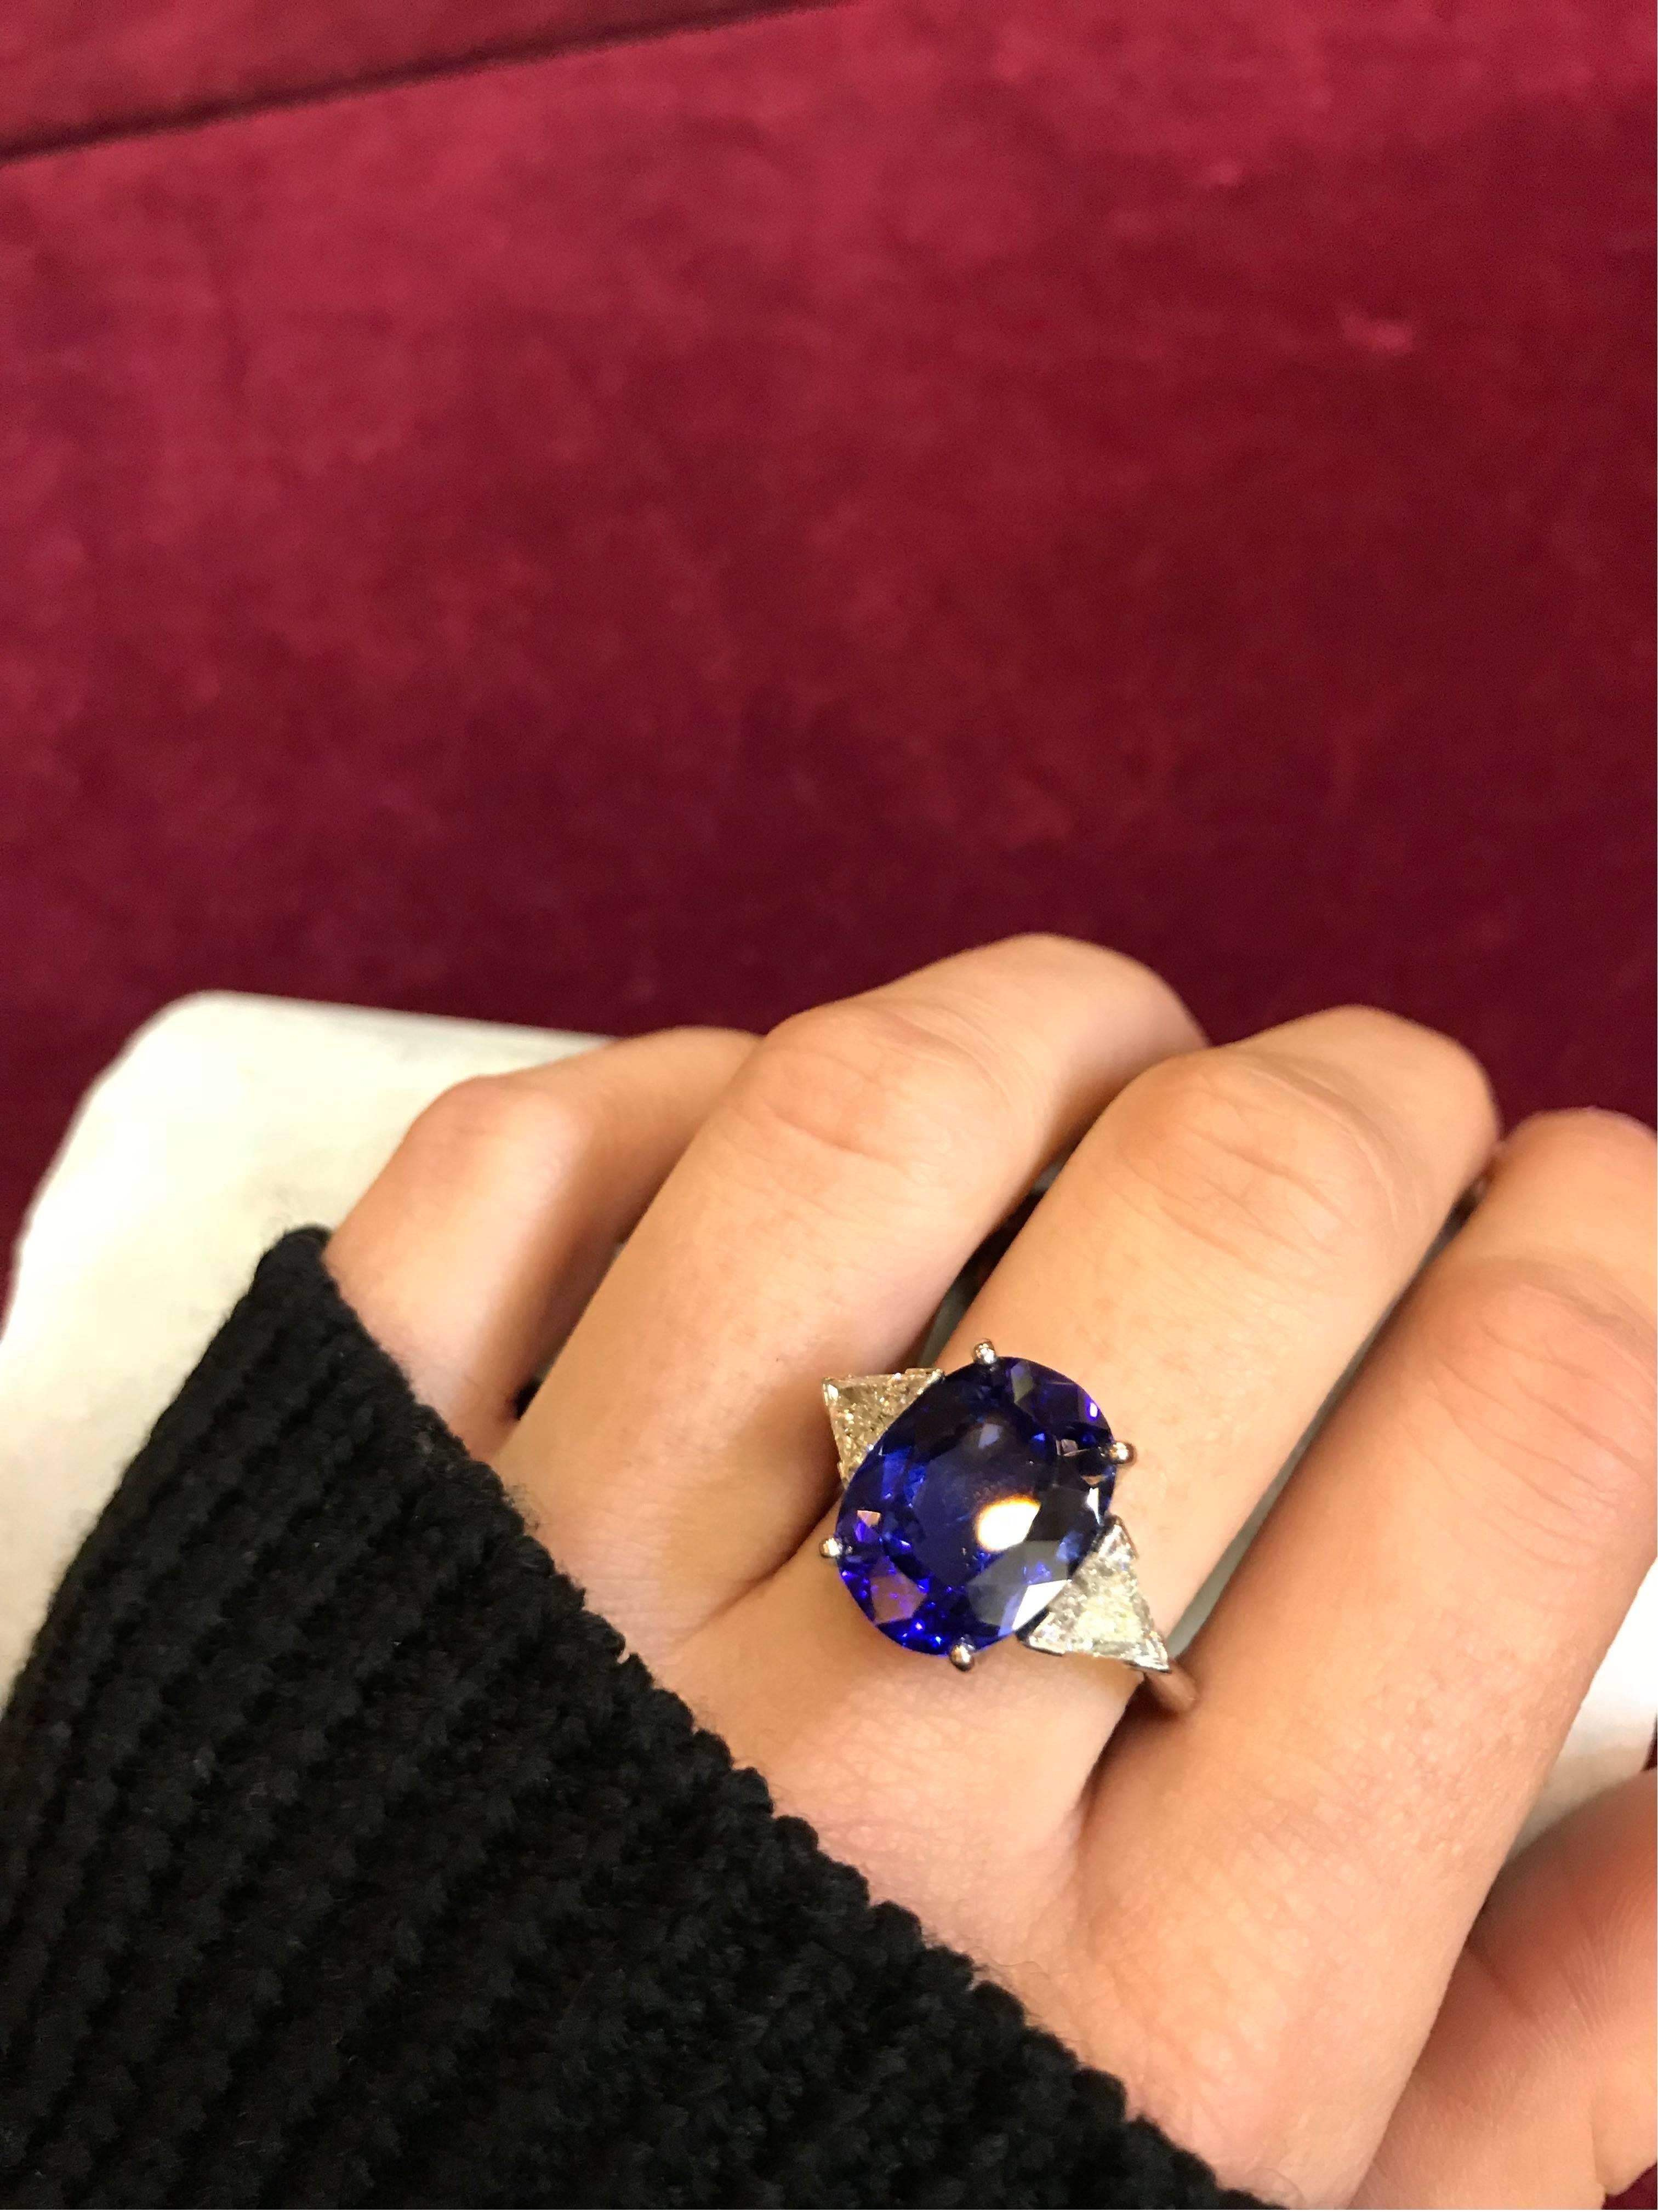 Royal Blue Natural Tanzanite: 8,27ct
White Diamonds: 0.81ct in total VVS-G
Gold: 18kt White Gold 6.50g
Our in-house workshop are able to re-size the ring to your preference and we would be happy to discuss this style with another stone if you so